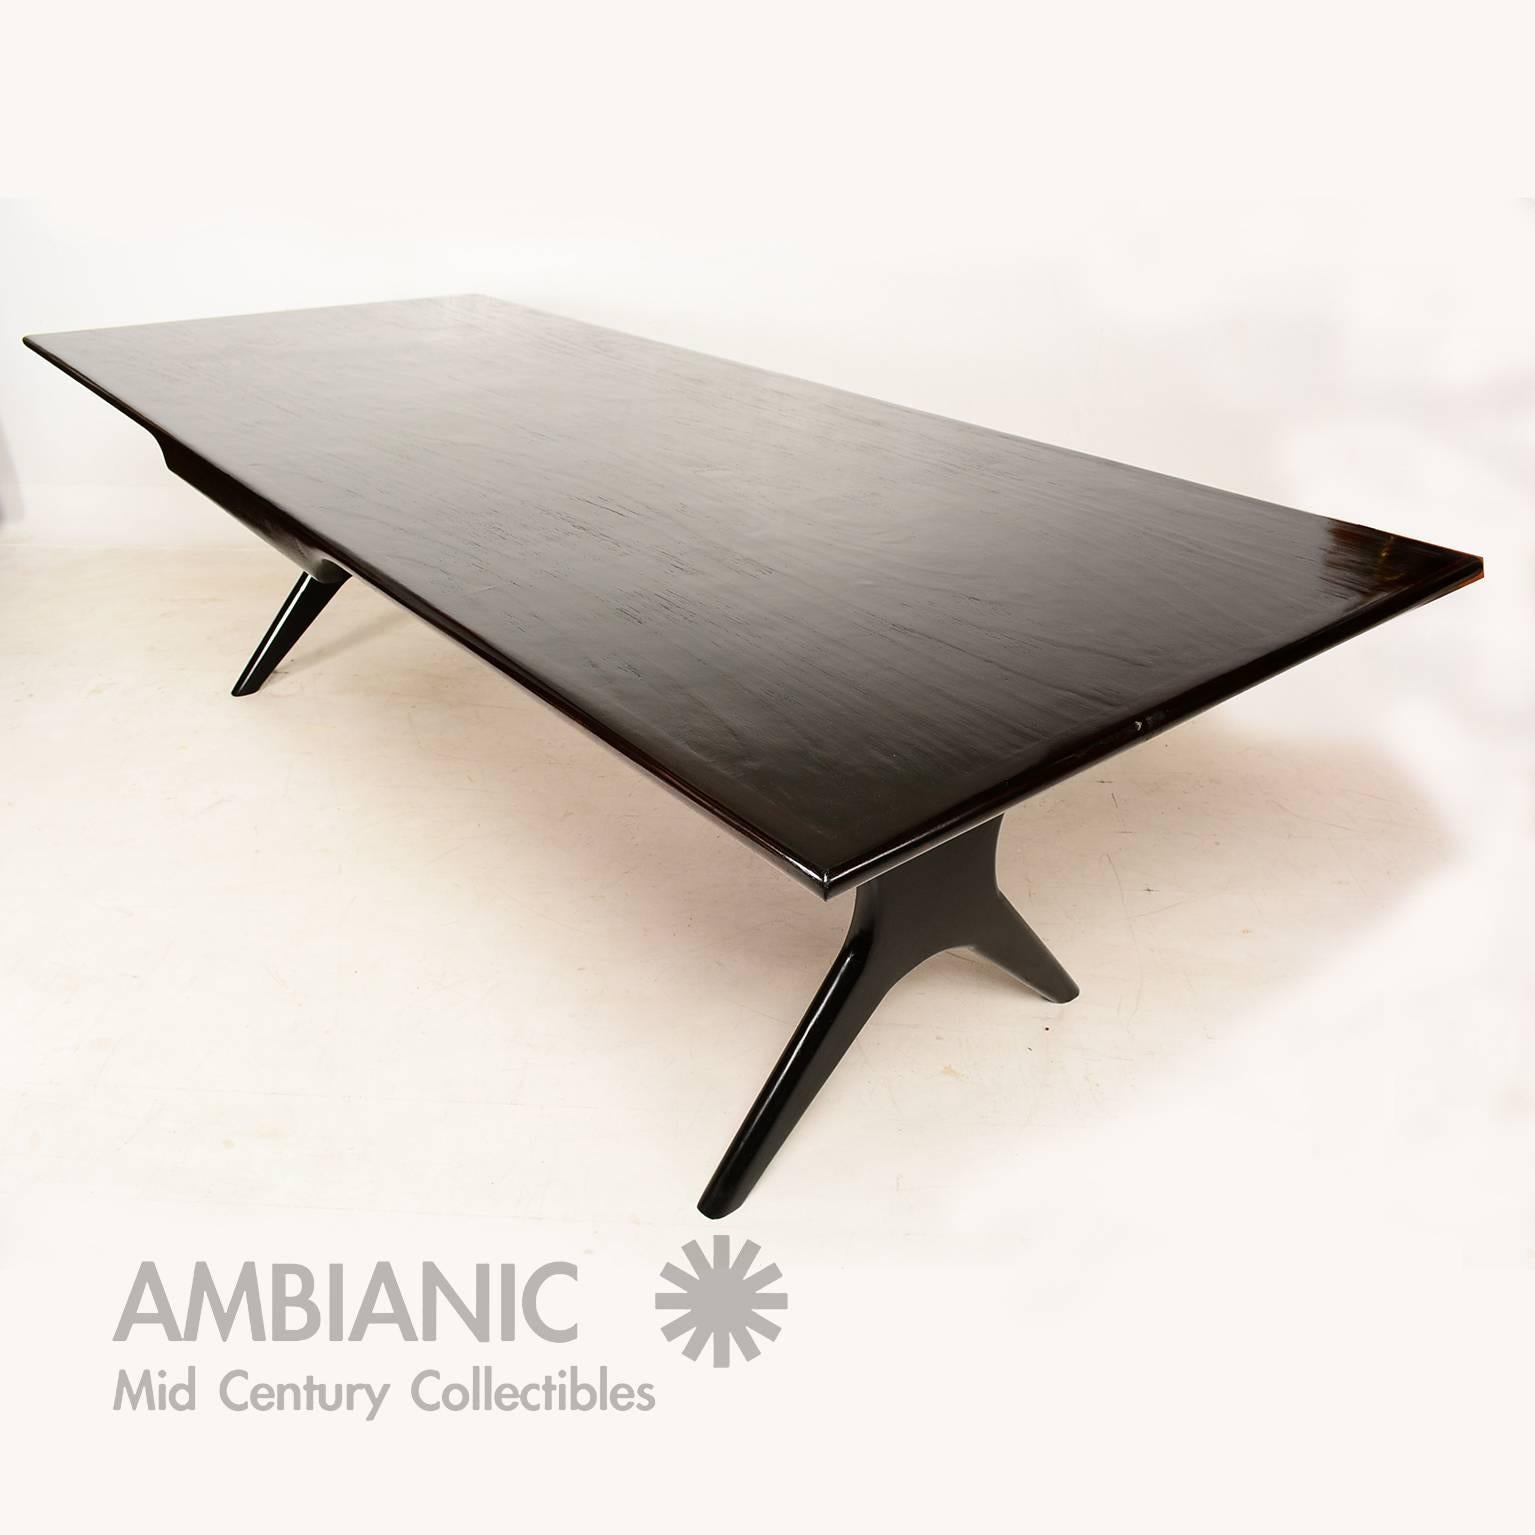 For your consideration a Mexican modernist dining table constructed with mahogany wood. 